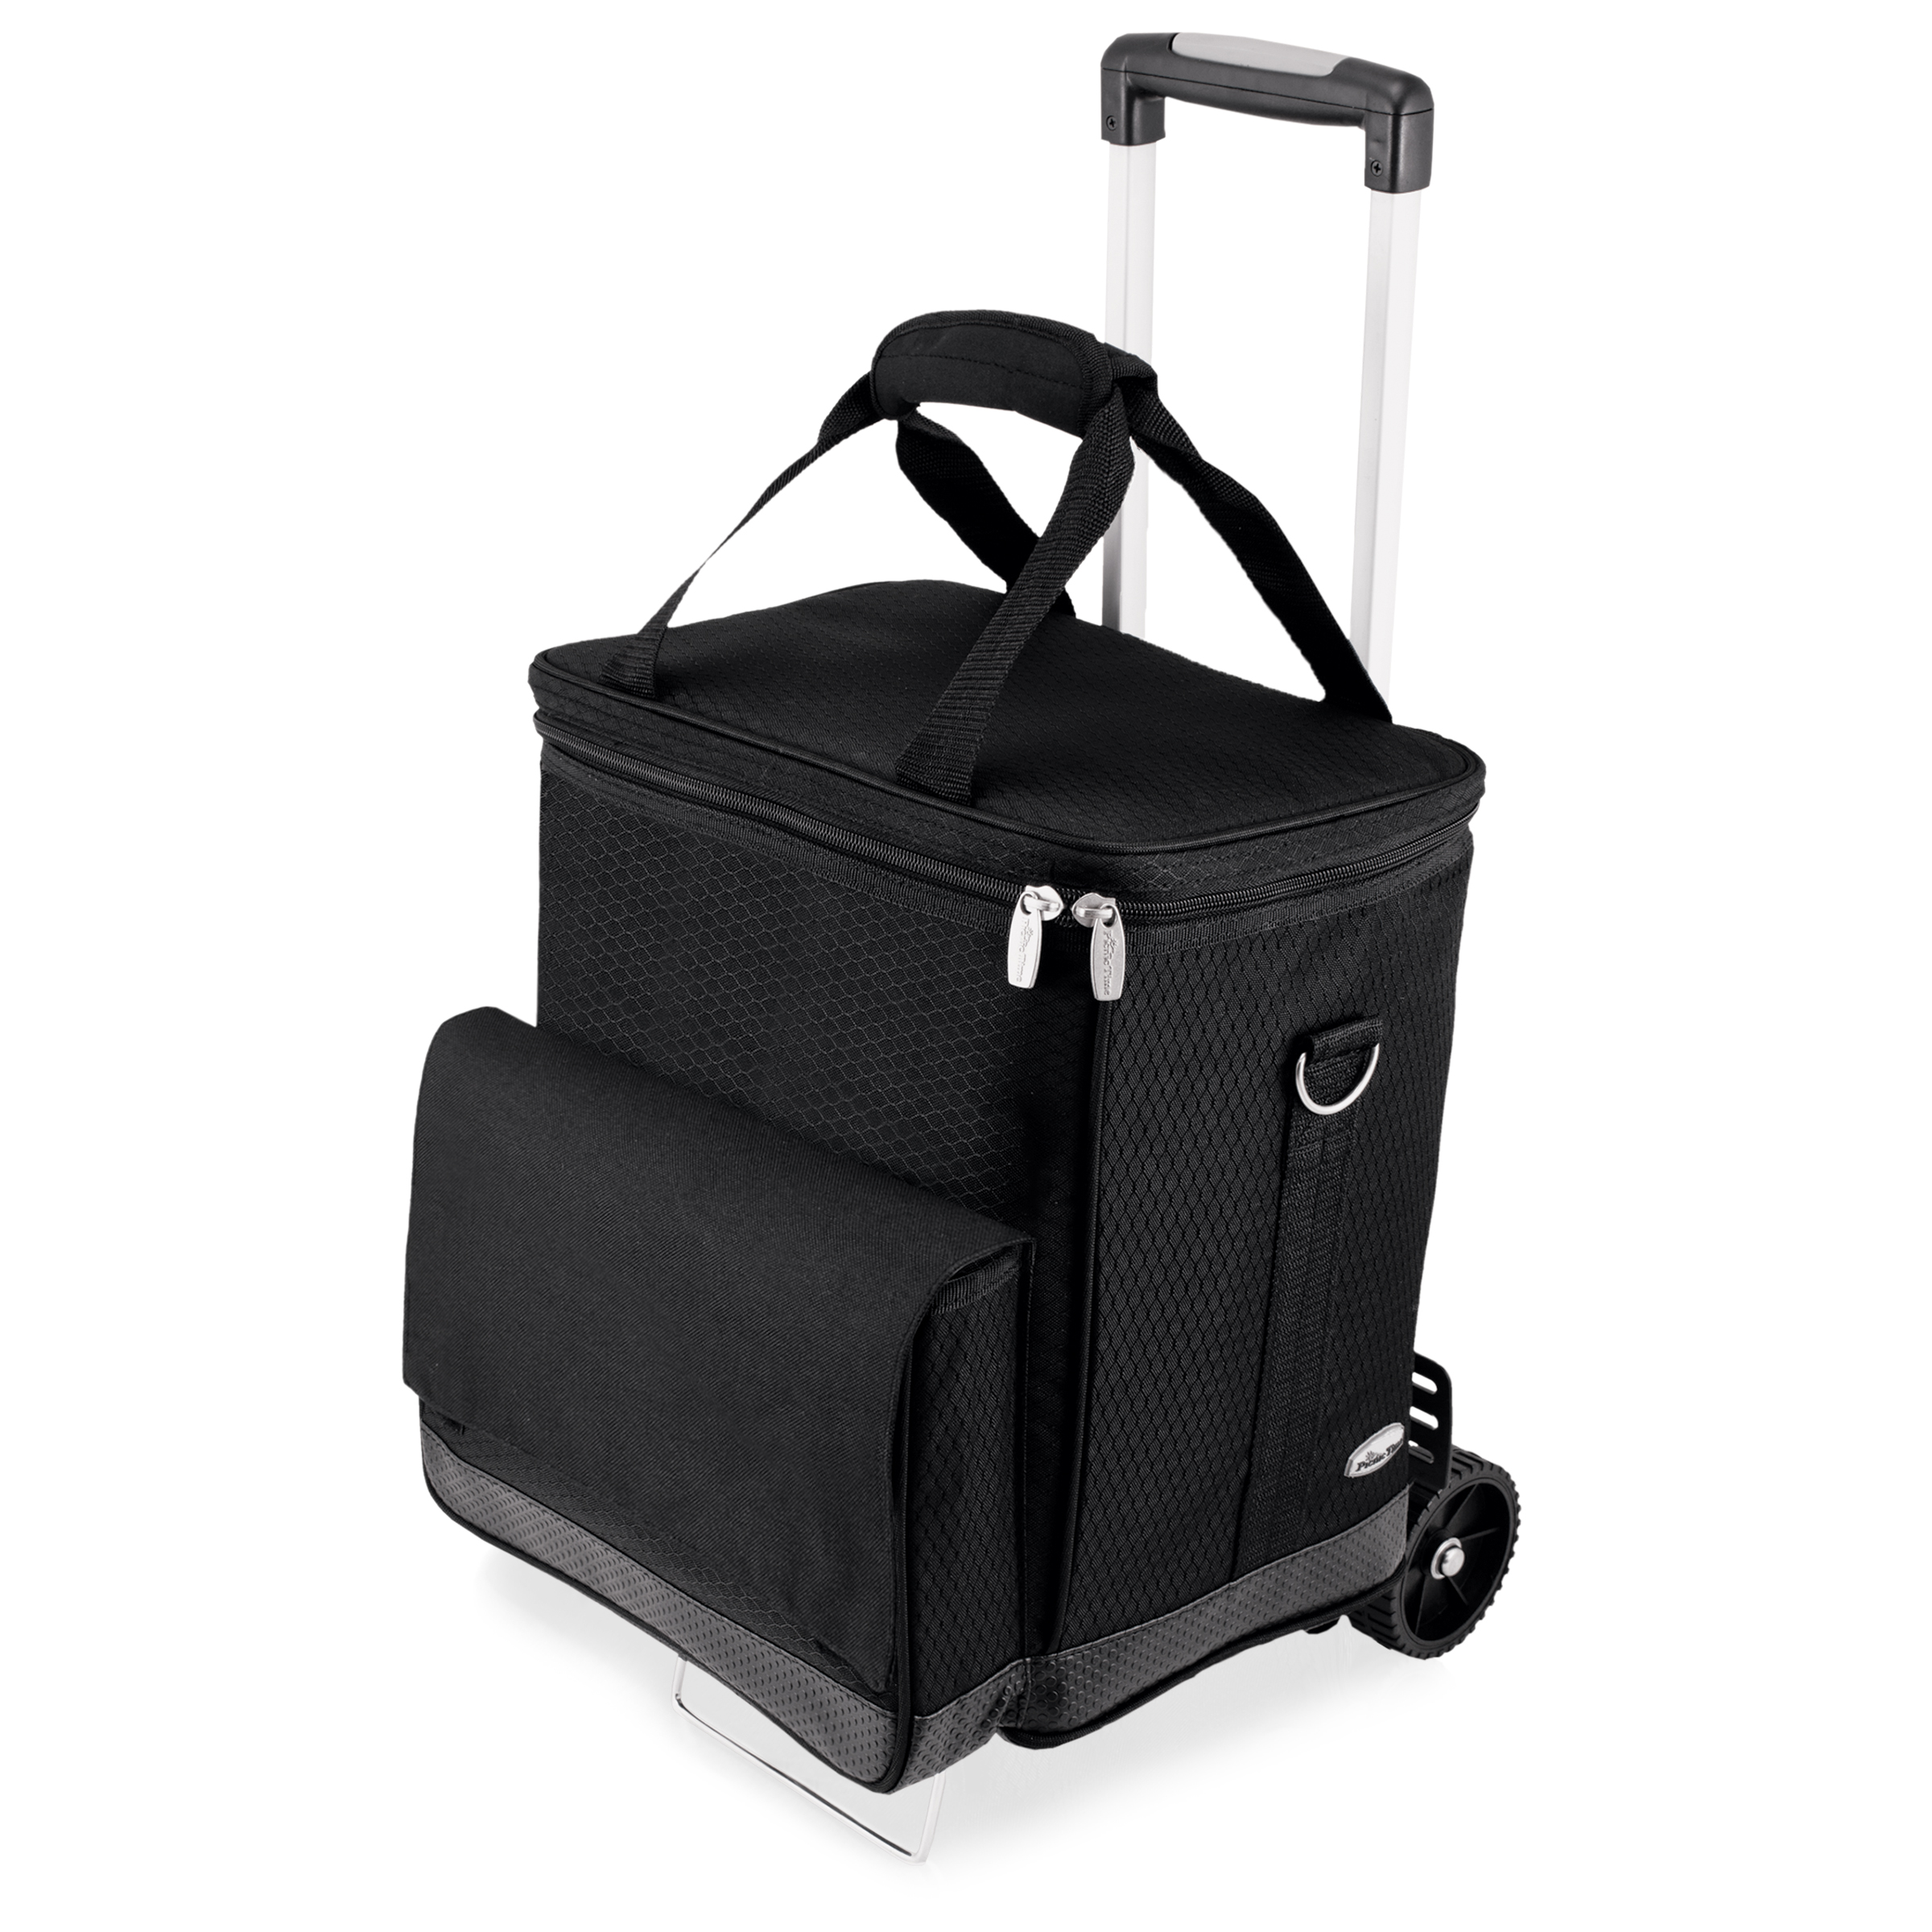 Cellar w/ Trolley Rolling Wine Luggage Carrier, ThermoGuard Insulation